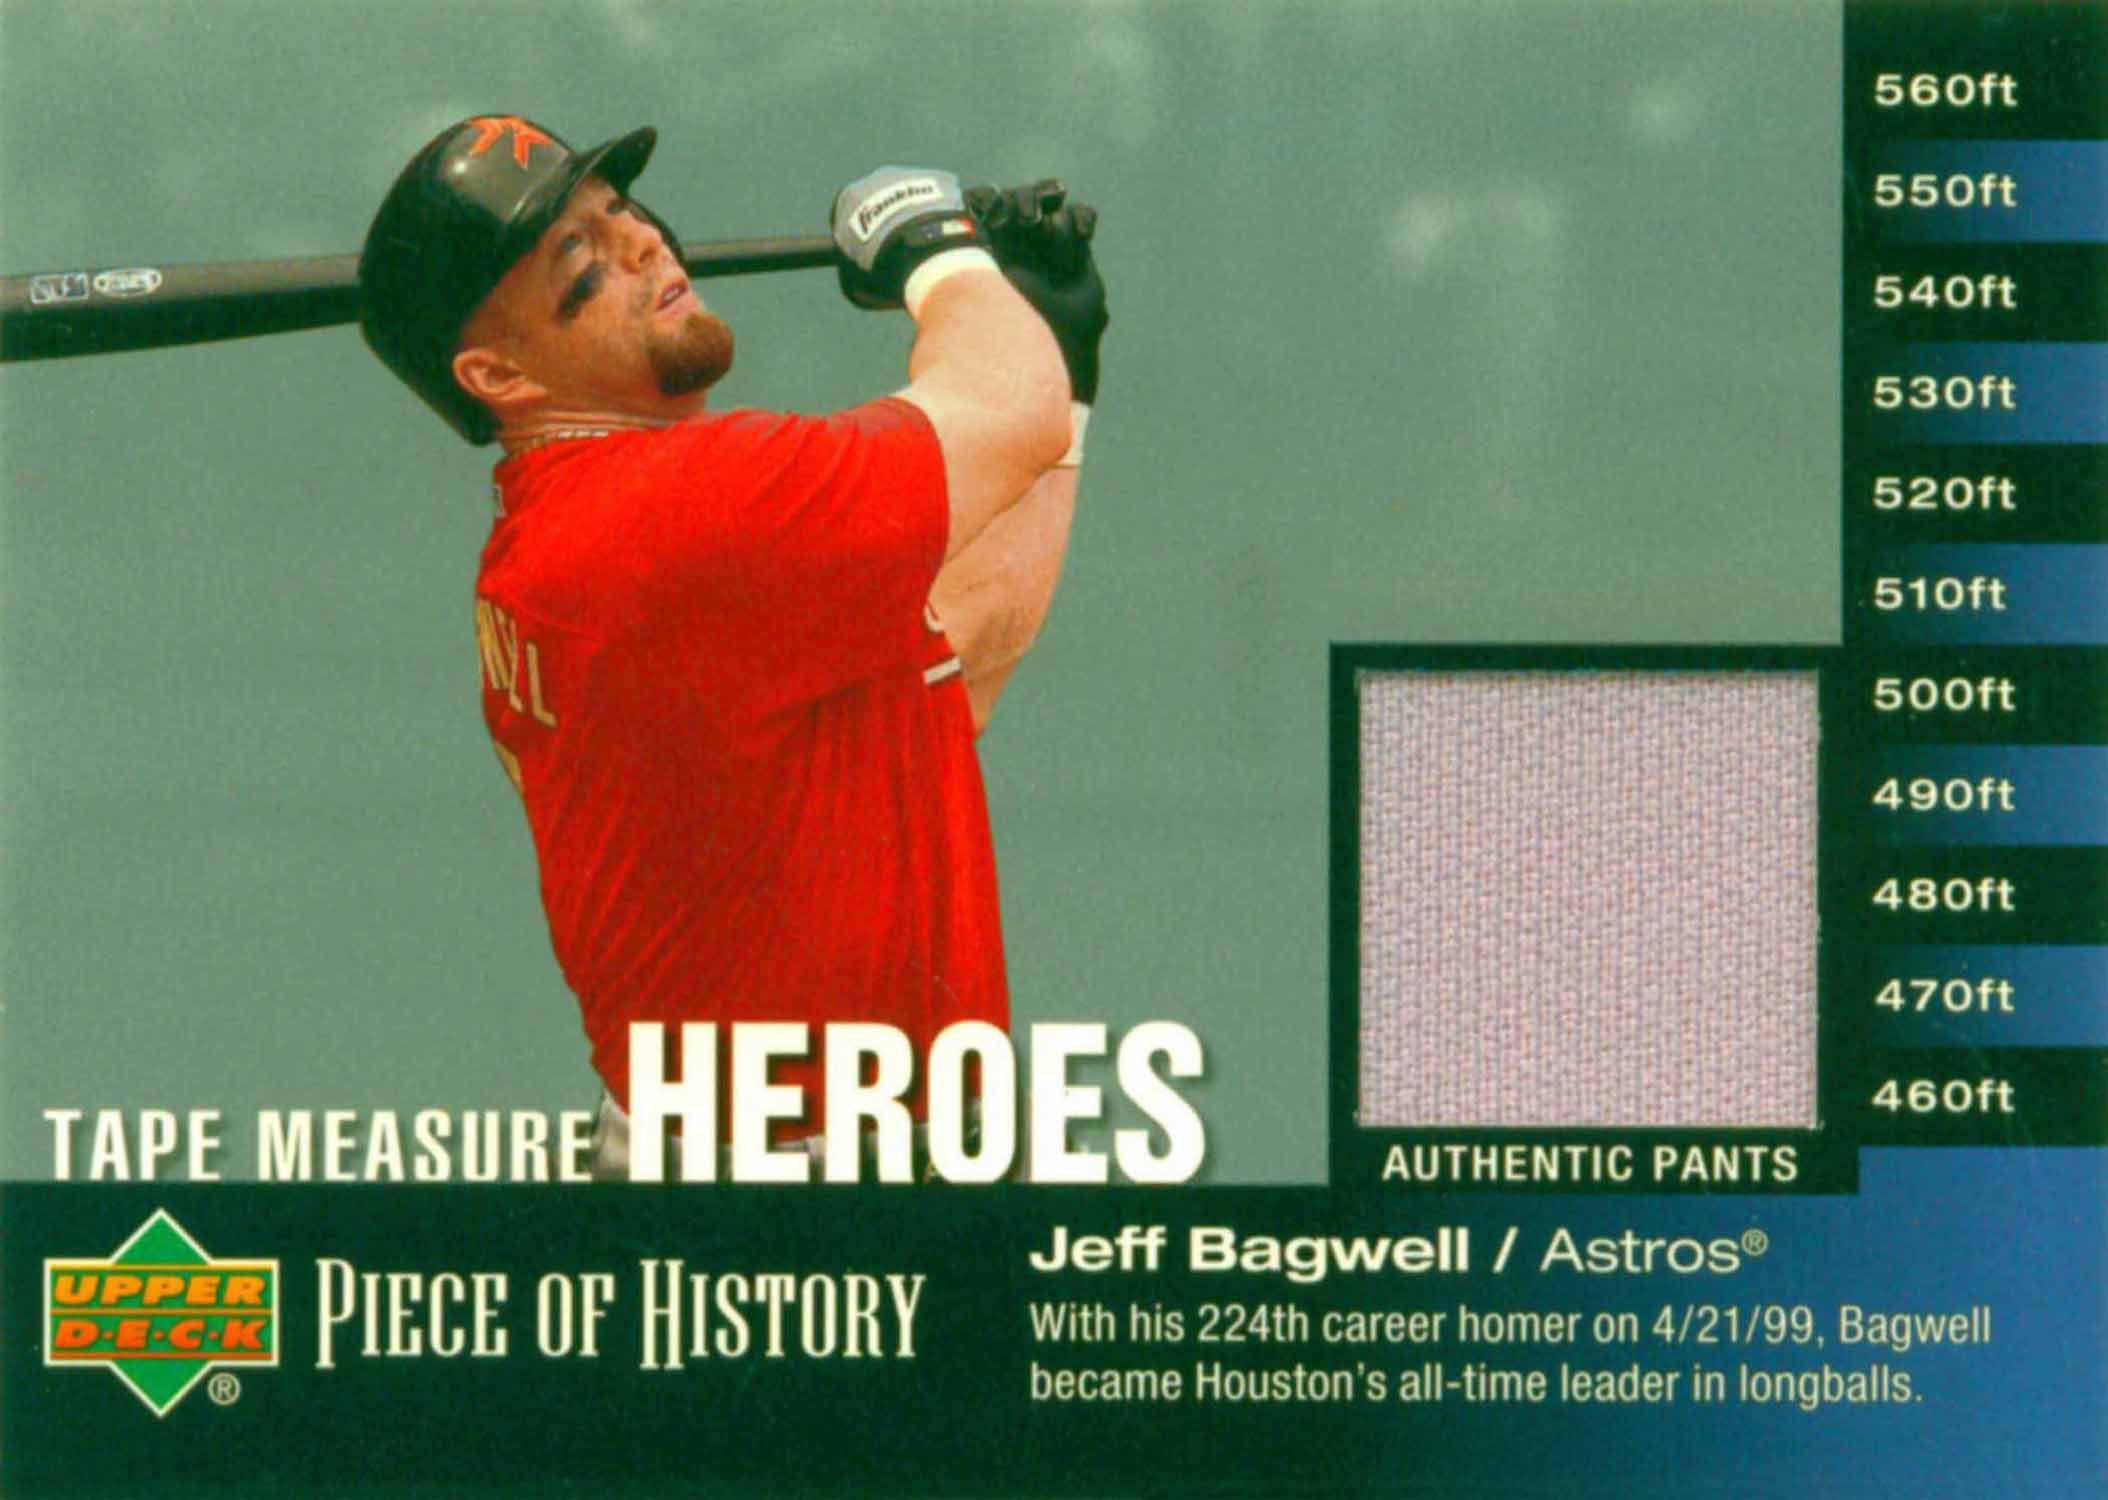 2002 UD Piece of History Tape Measure Heroes Jersey